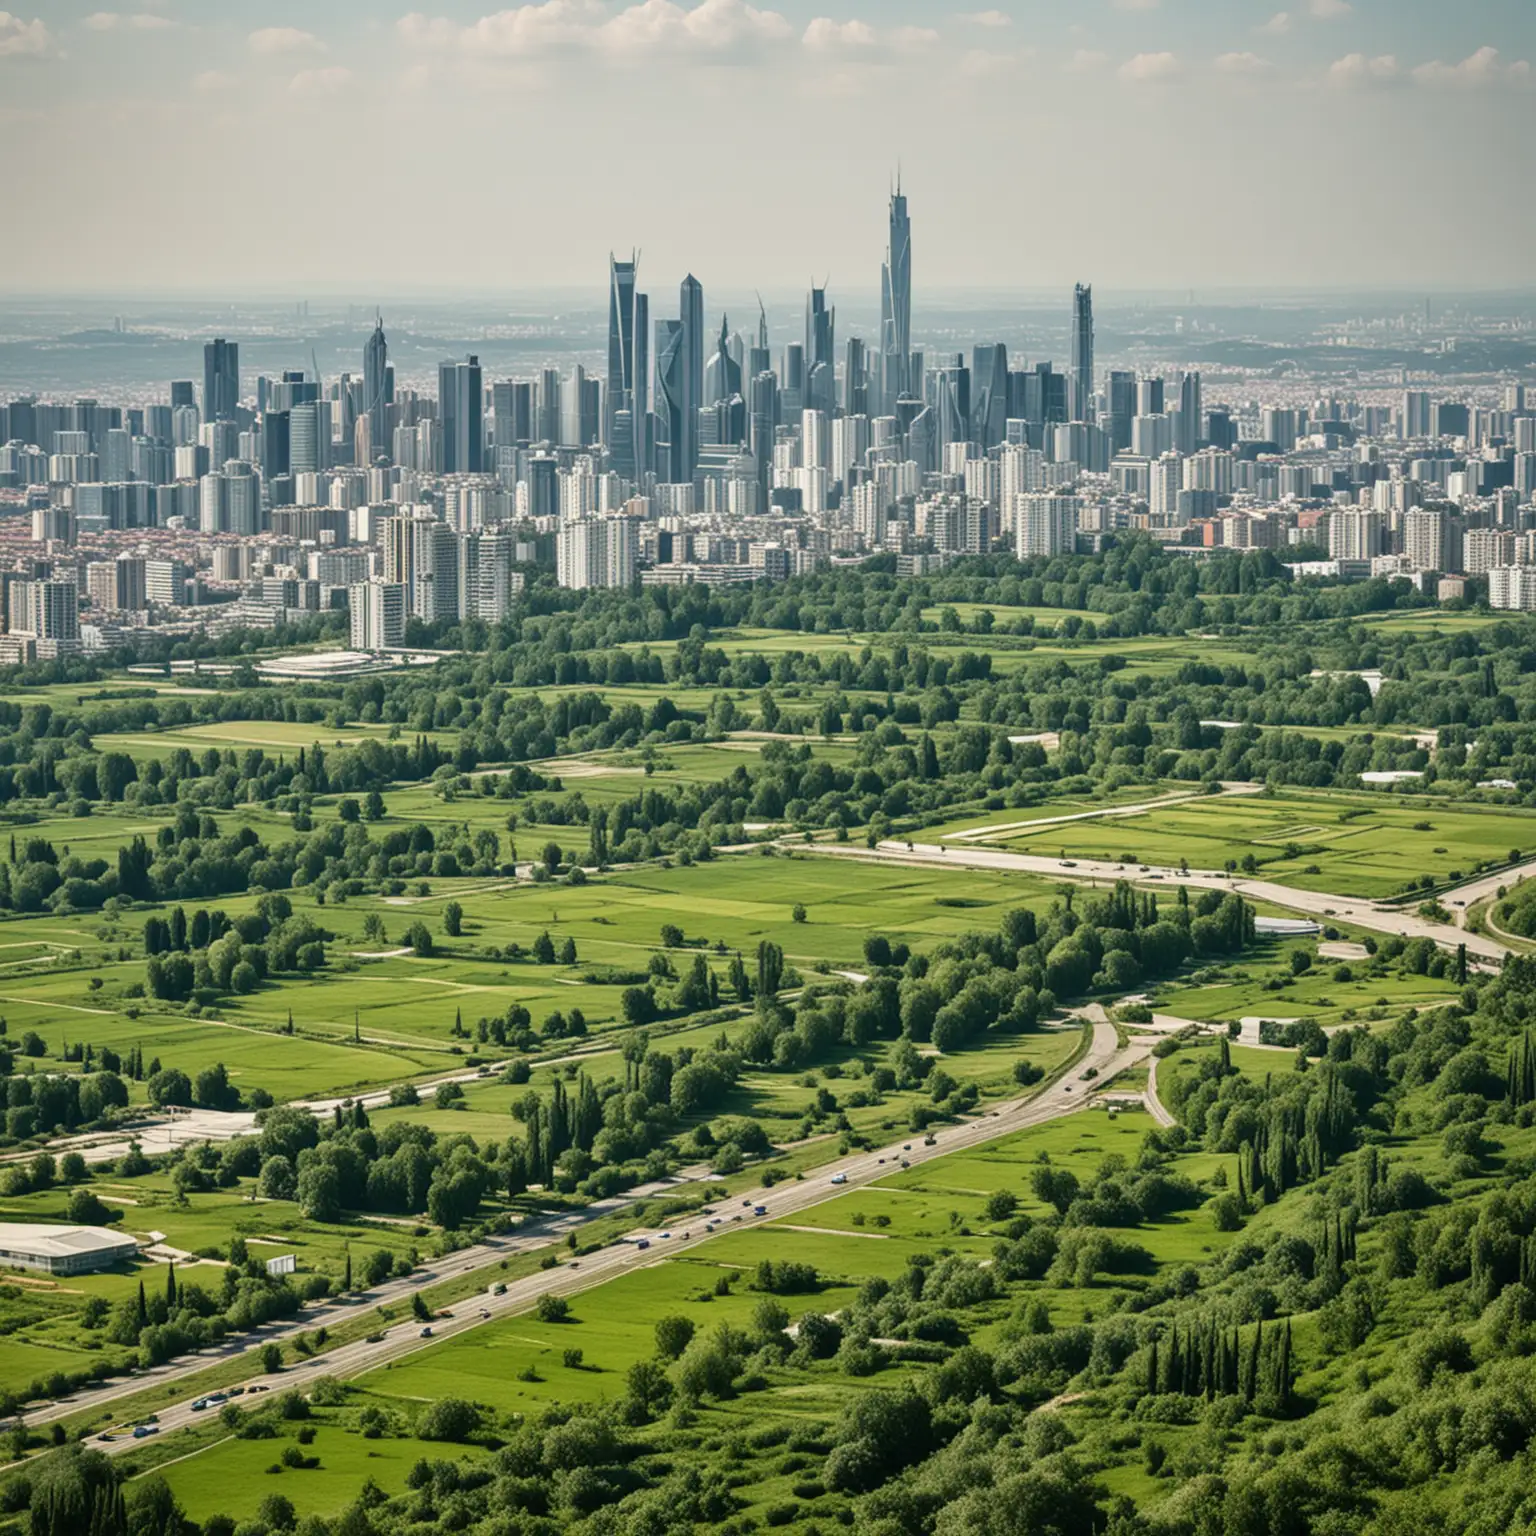 a very green landscape, with very modern cities